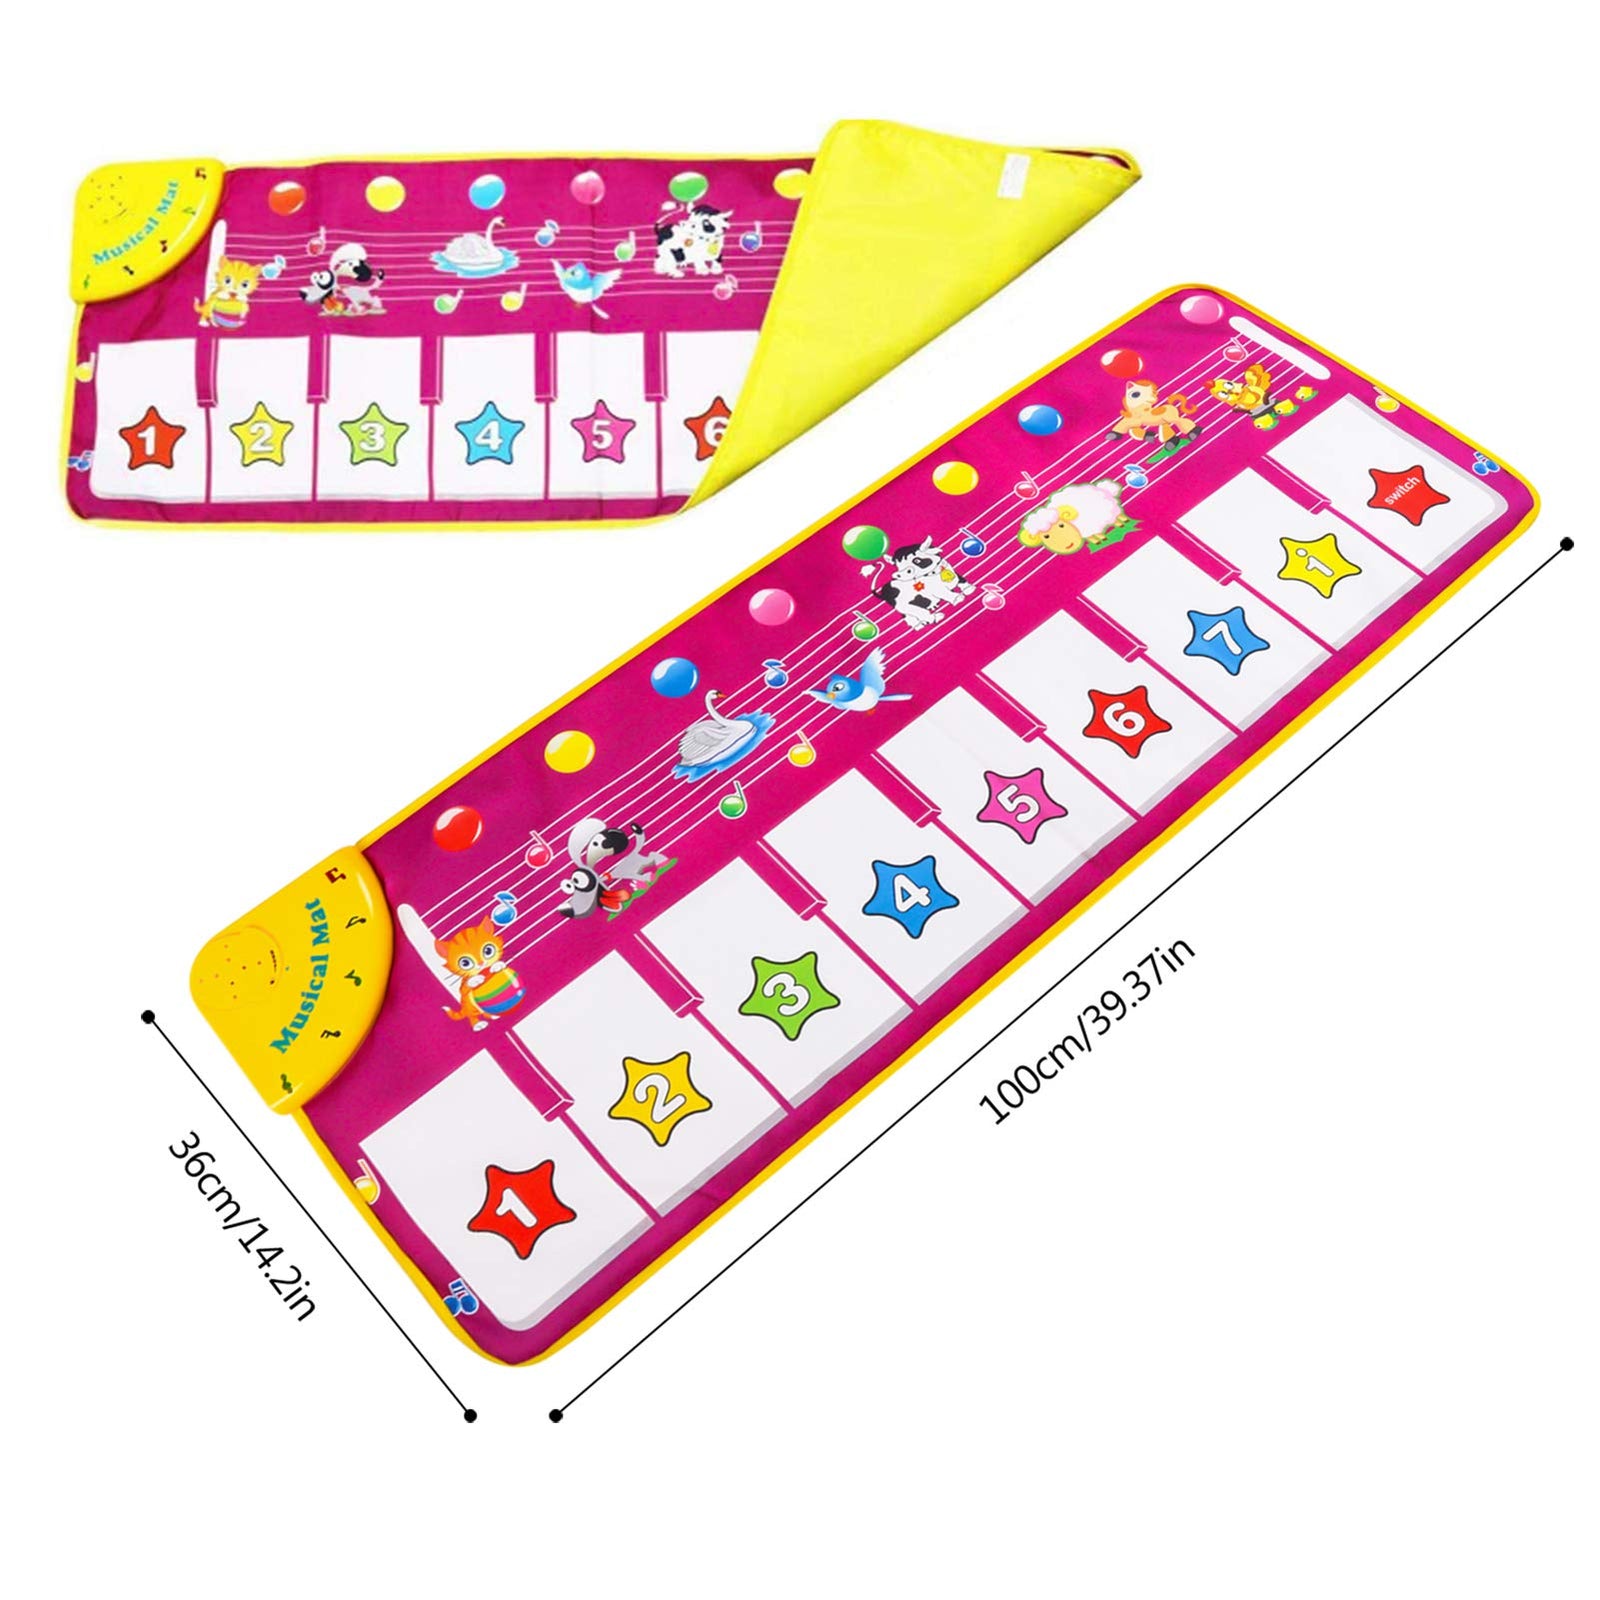 M SANMERSEN Piano Mat, Musical Keyboard Playmat 39.5" Electronic Music Animal Touch Play Blanket Funny Xmas Gift Toy